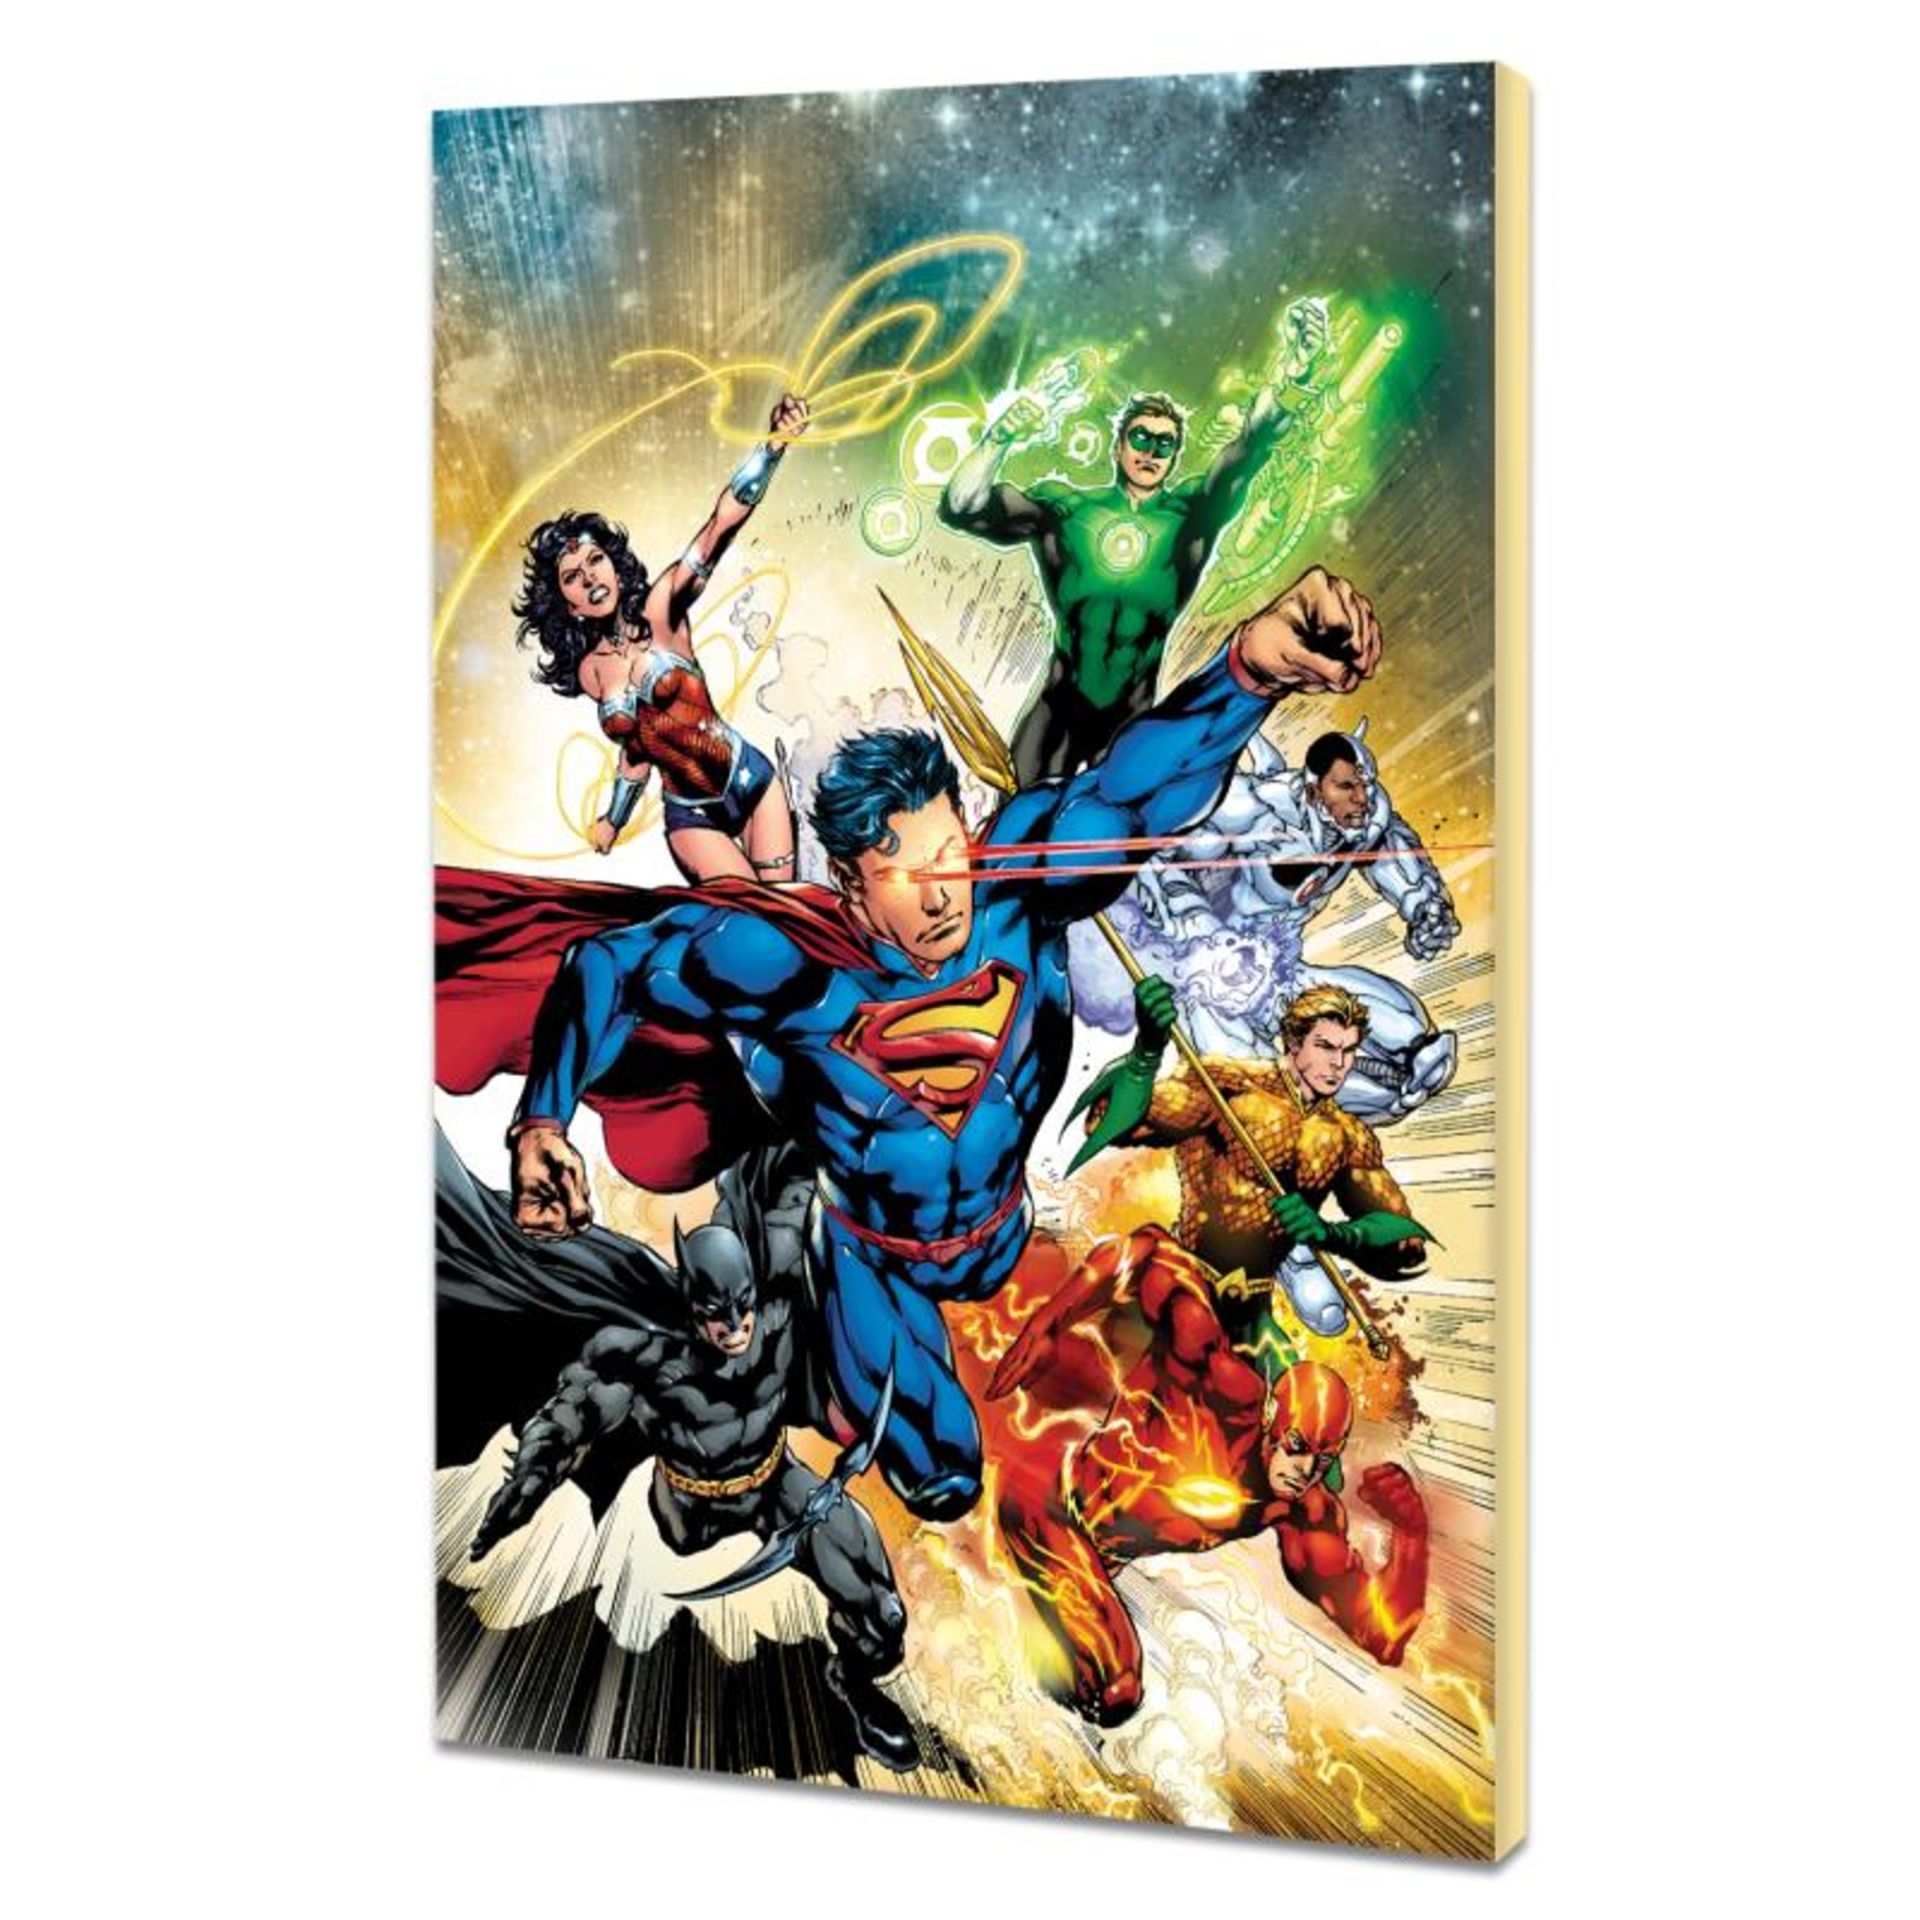 DC Comics, "Justice League #2" Numbered Limited Edition Giclee on Canvas by Ivan - Image 3 of 3